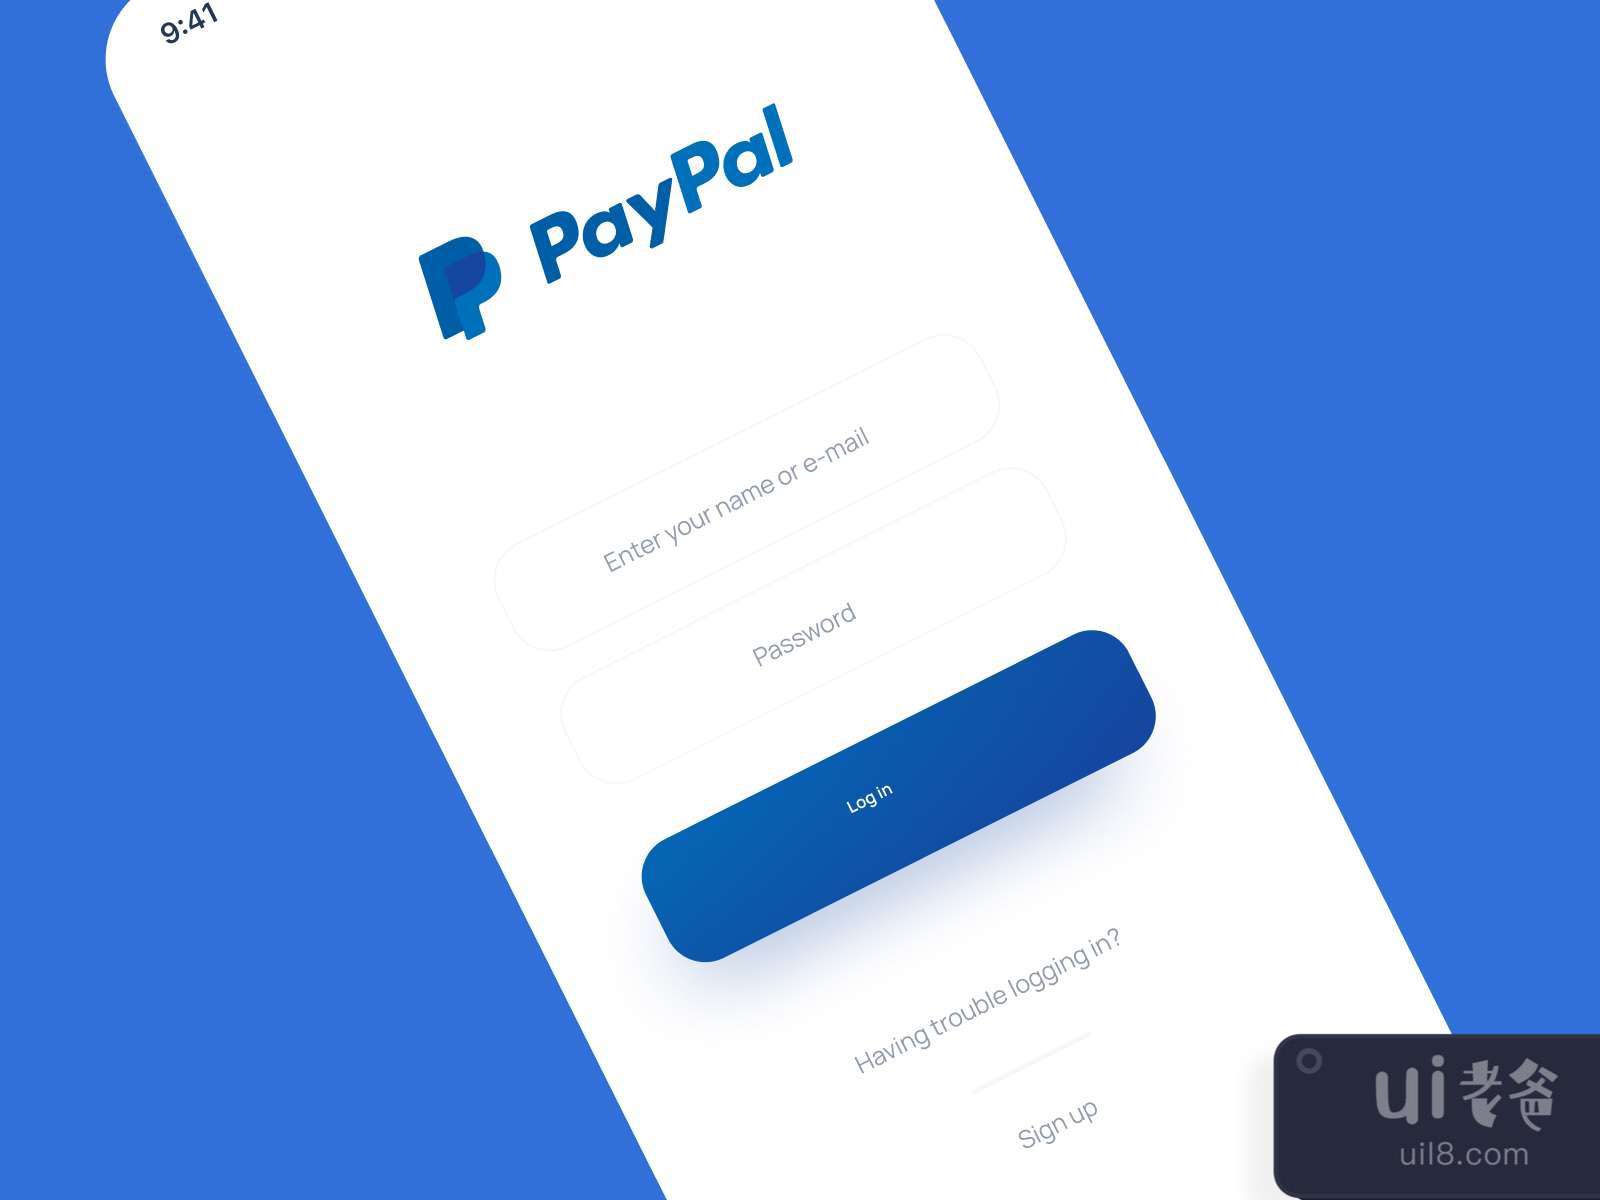 Paypal Redesign for Figma and Adobe XD No 3